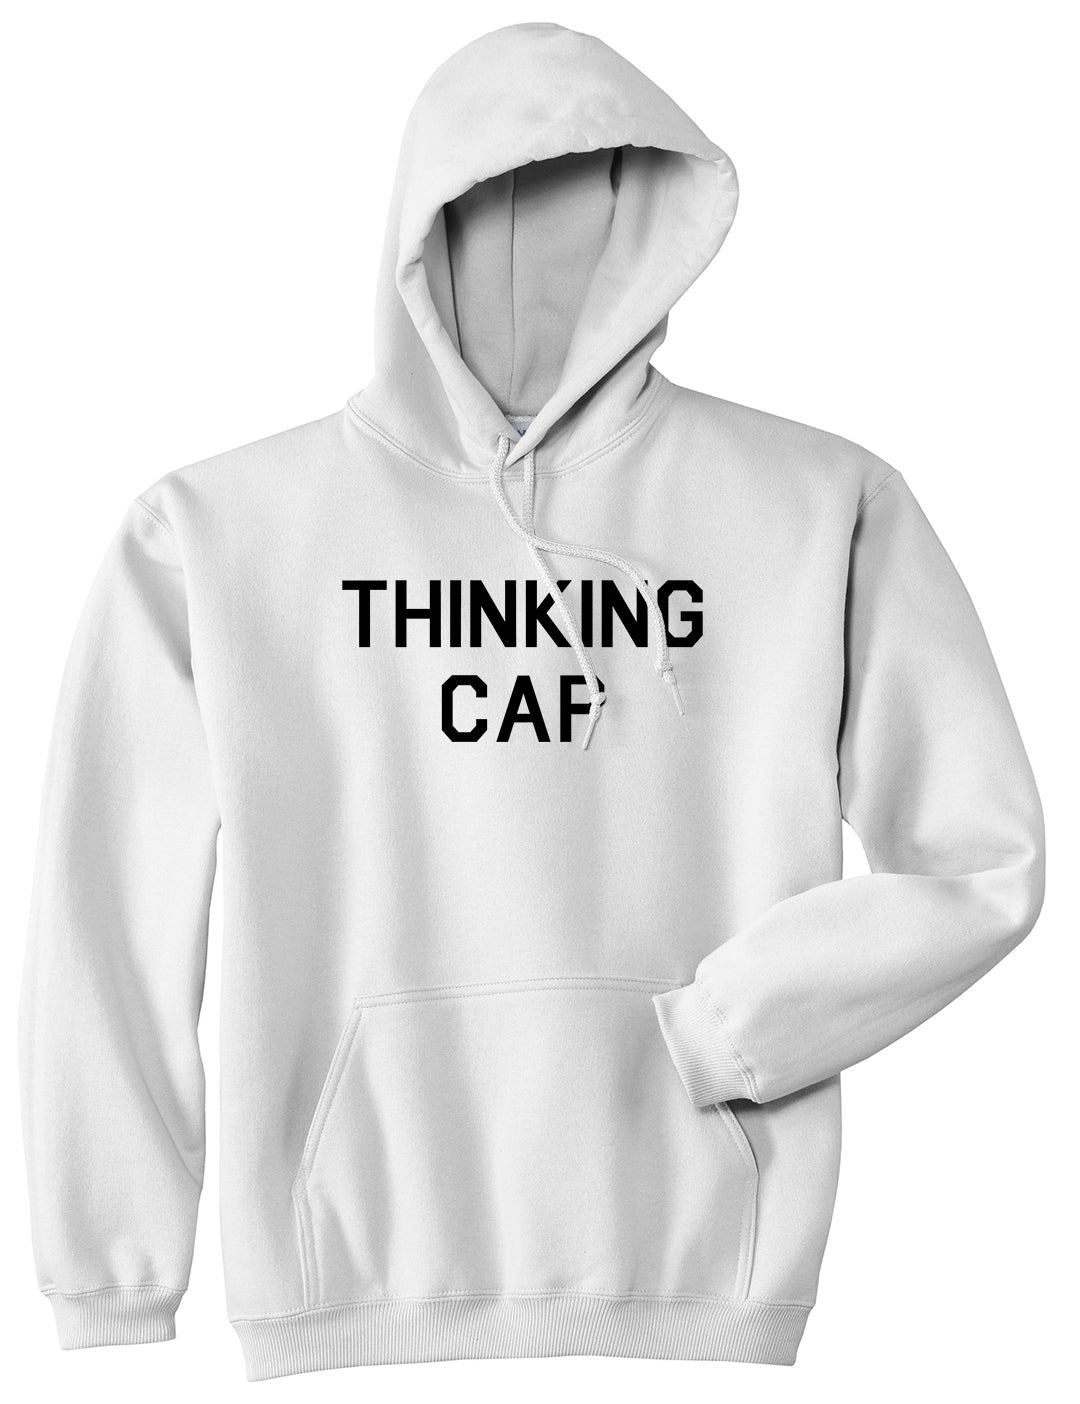 Thinking Cap Funny Nerd White Pullover Hoodie by Kings Of NY